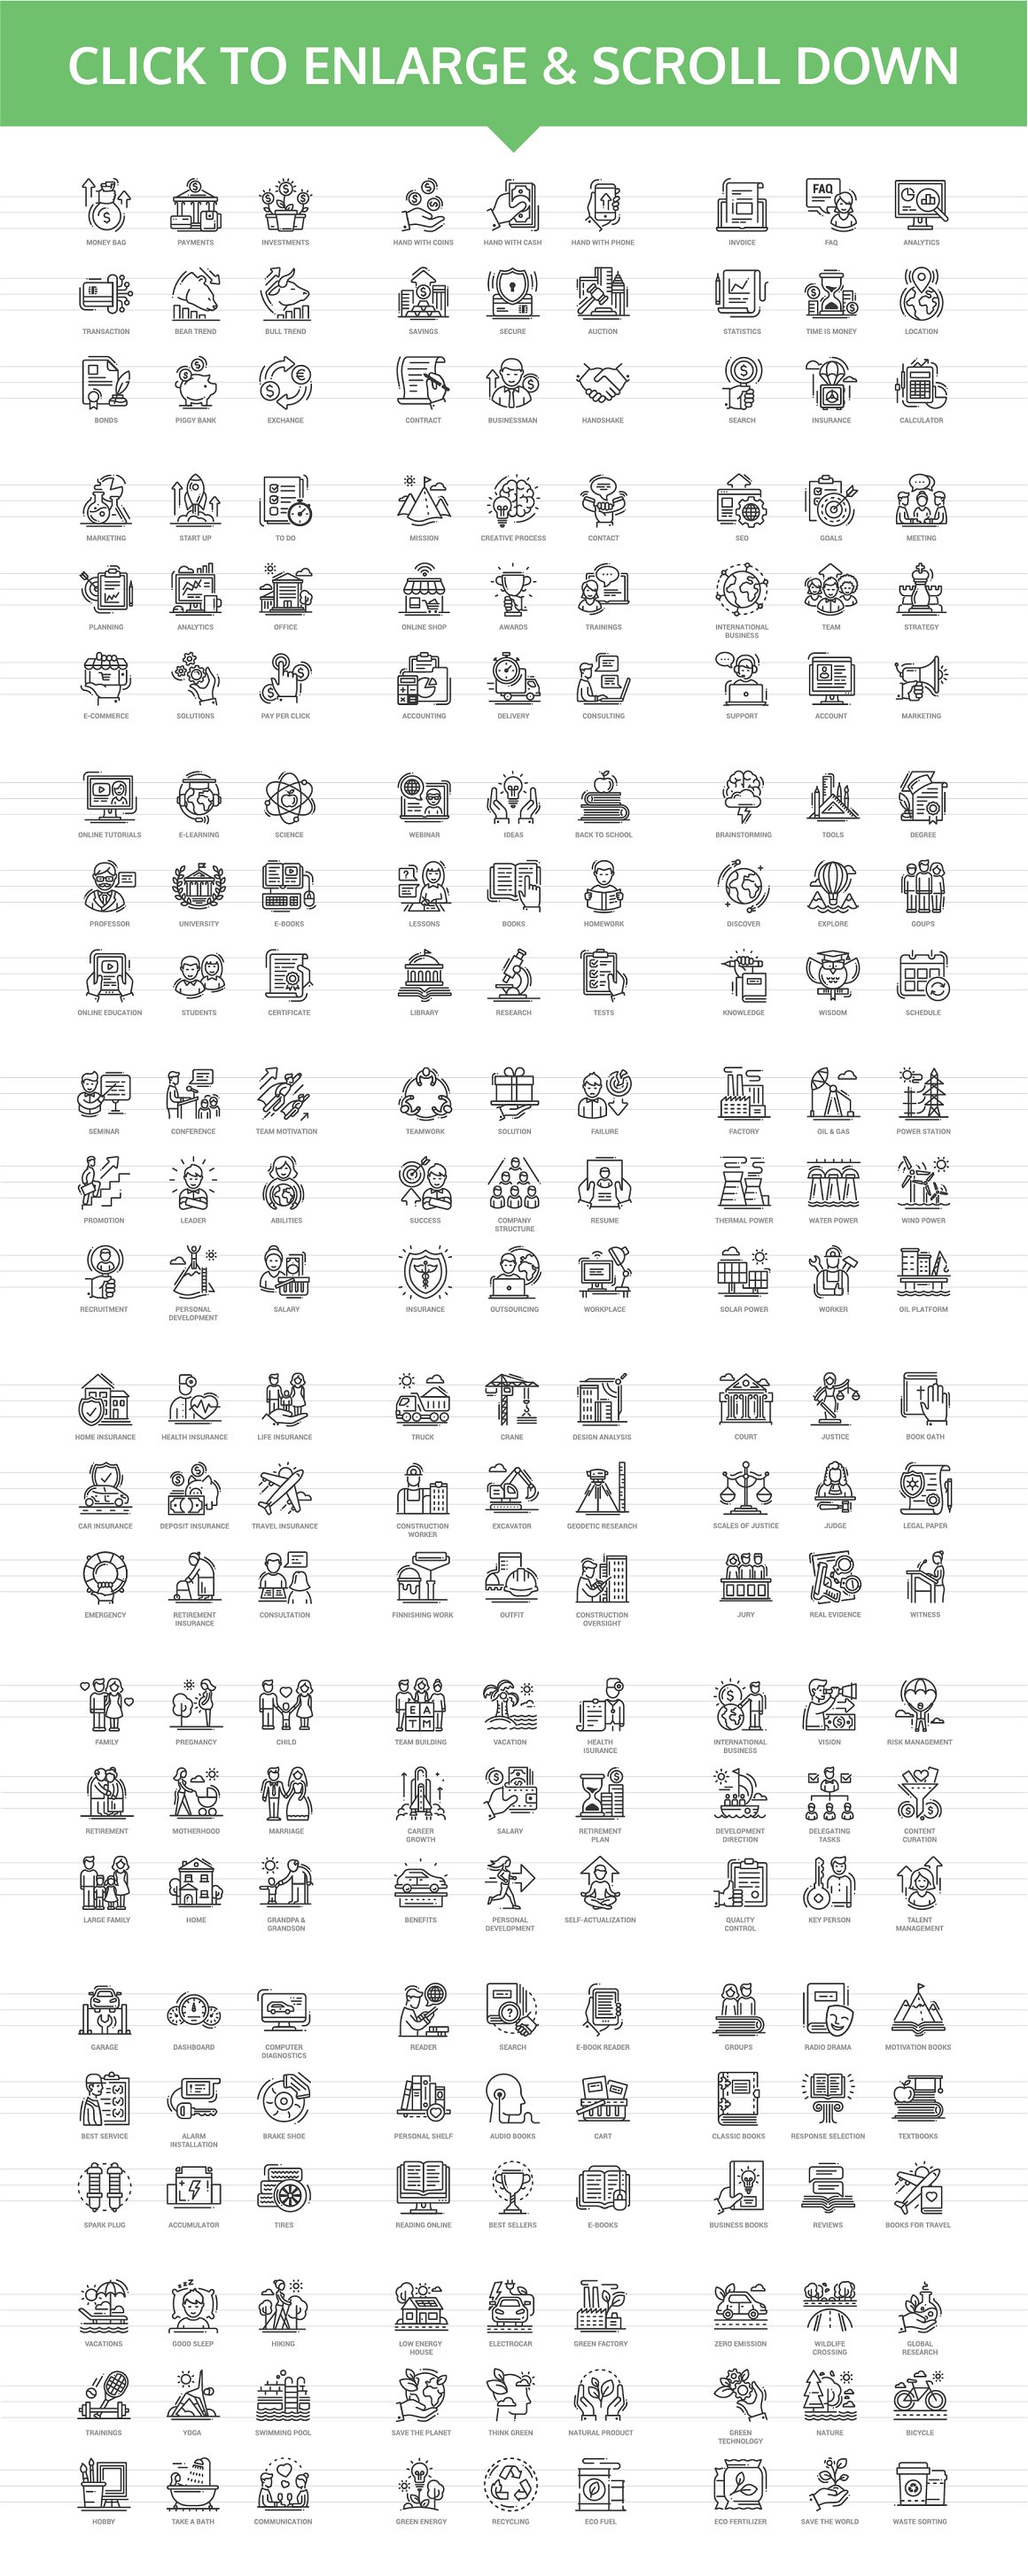 A set of different black innovicons icons on a white background.